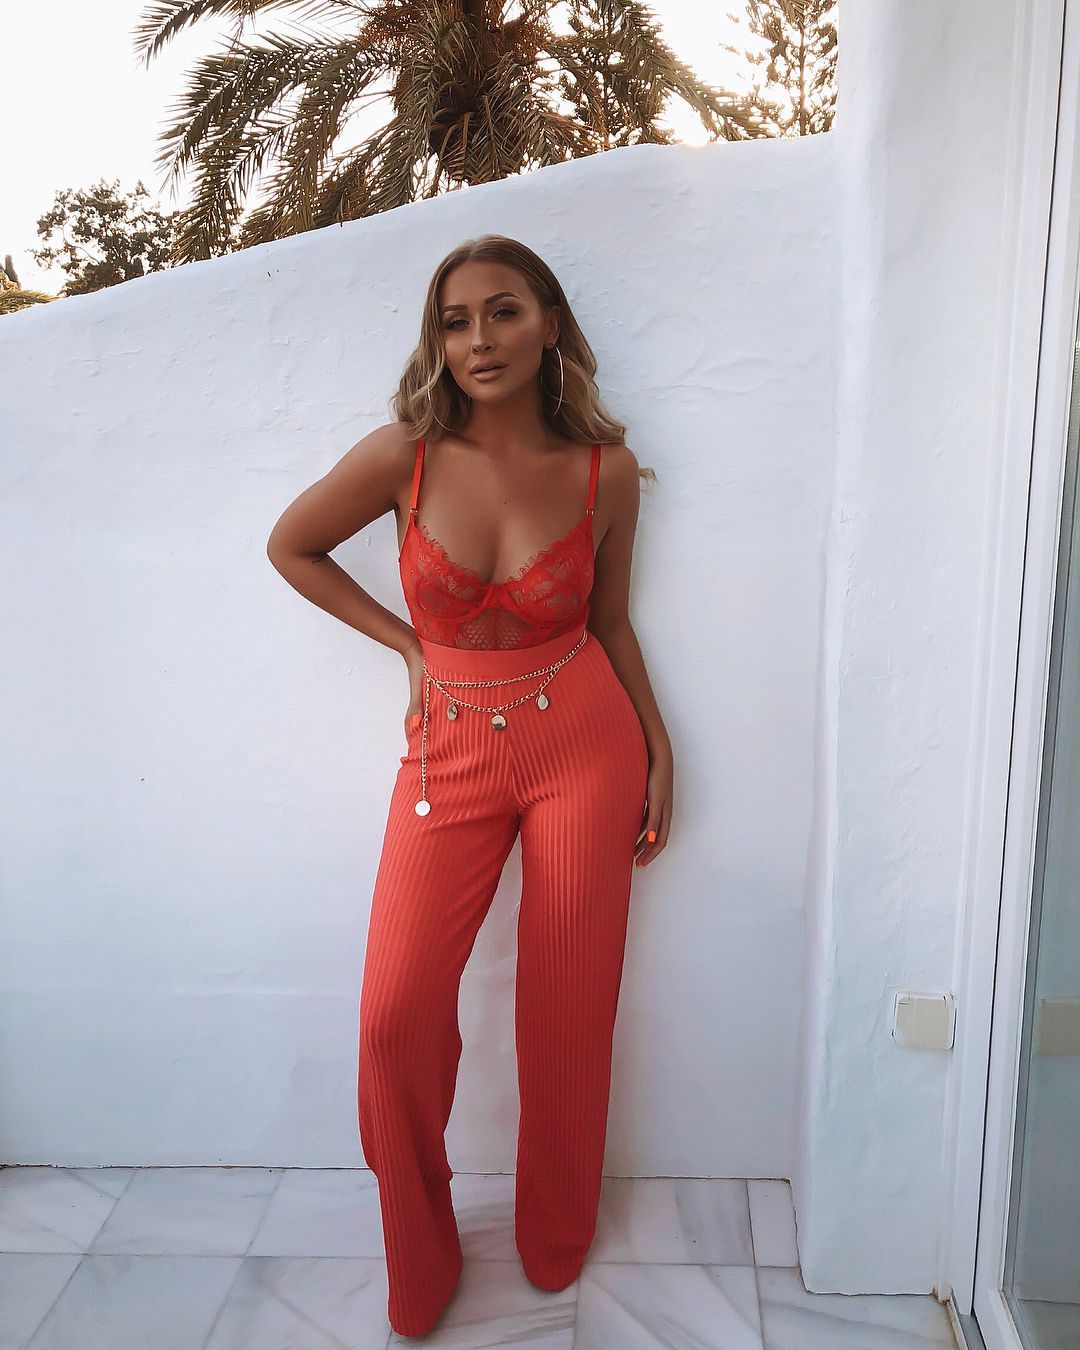 SARAH ASHCROFT on Instagram: “Marbella nights вњЁ outfit tagged” -   15 holiday Outfits night ideas